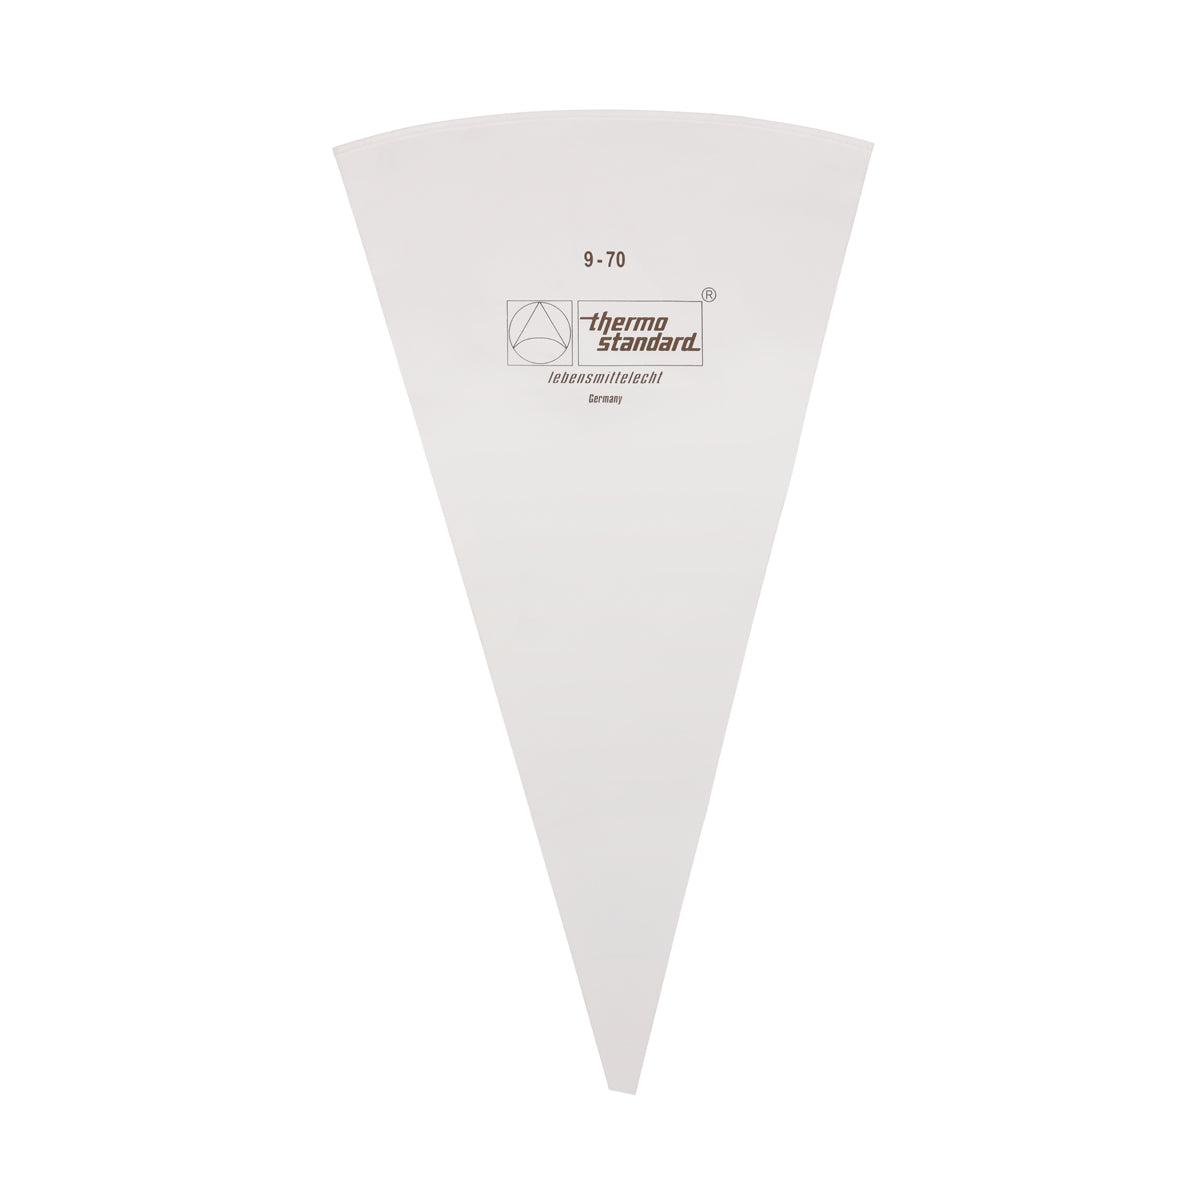 01779 Thermohauser Standard Pastry Bag 700mm Tomkin Australia Hospitality Supplies